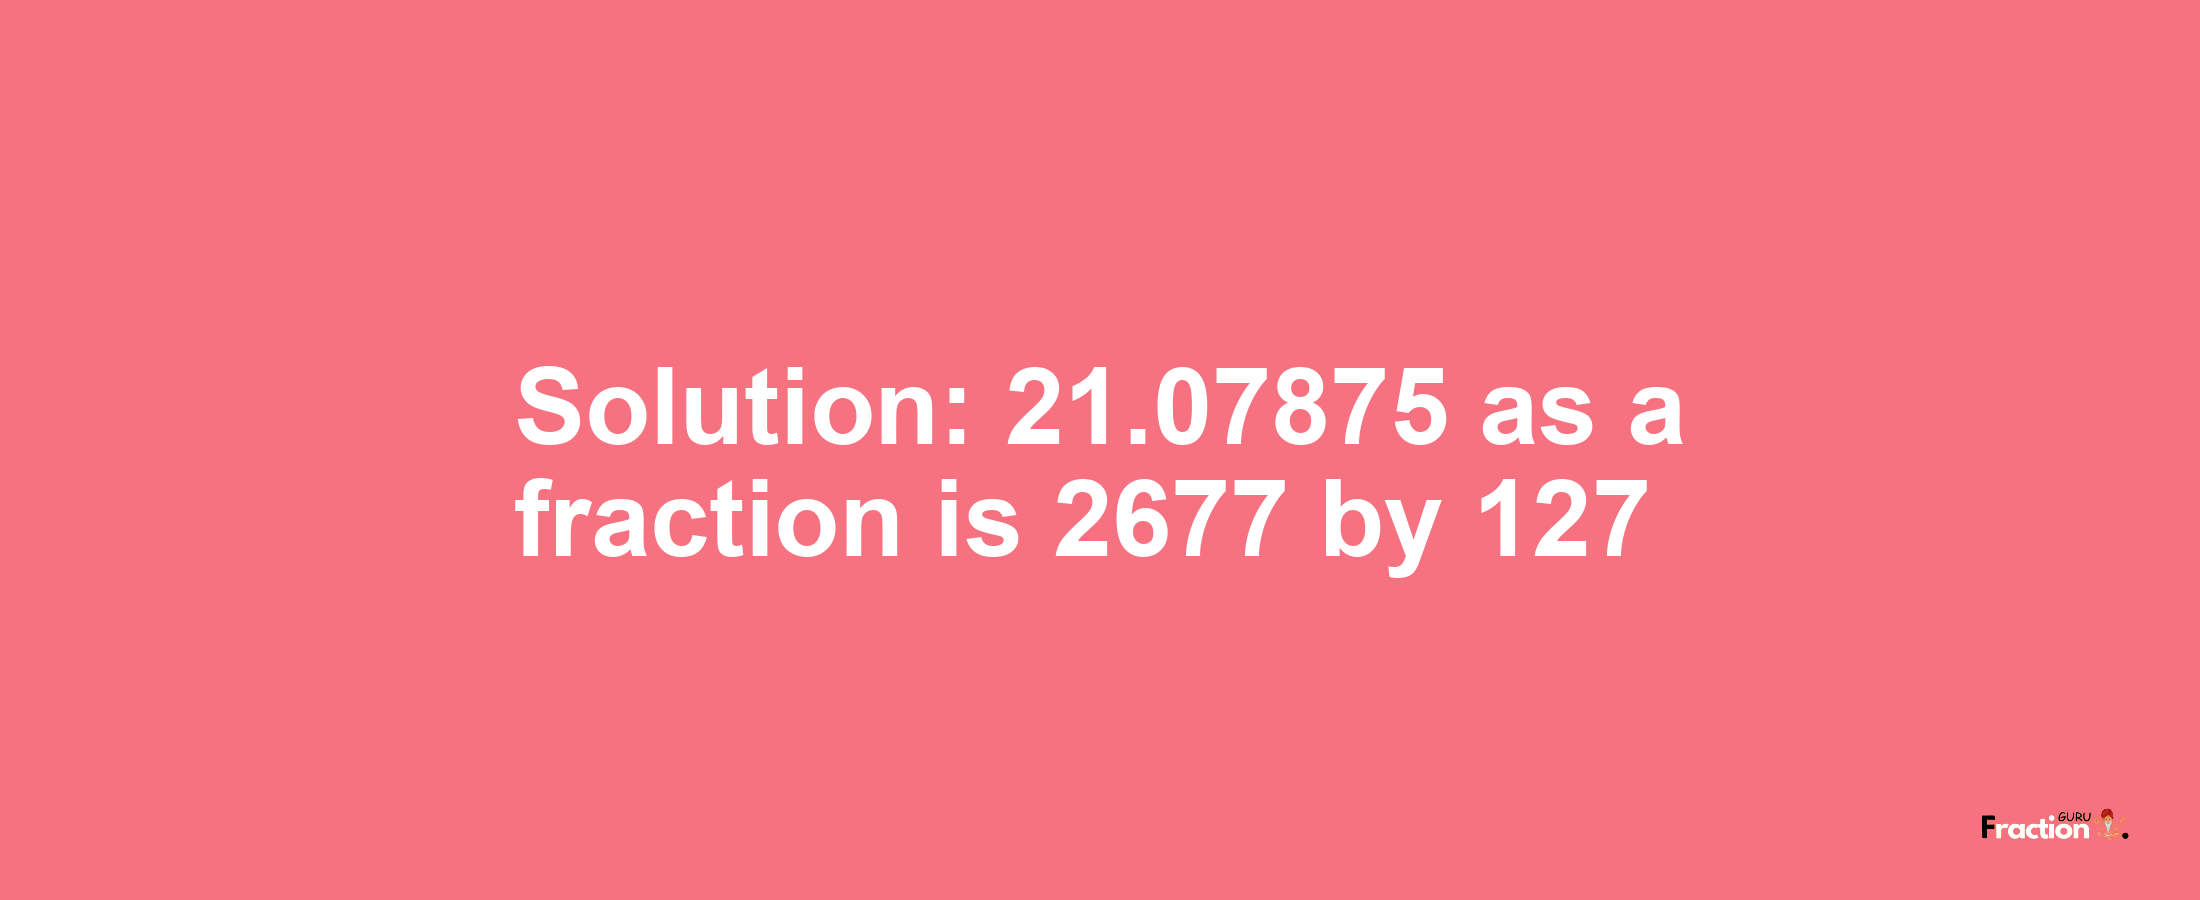 Solution:21.07875 as a fraction is 2677/127